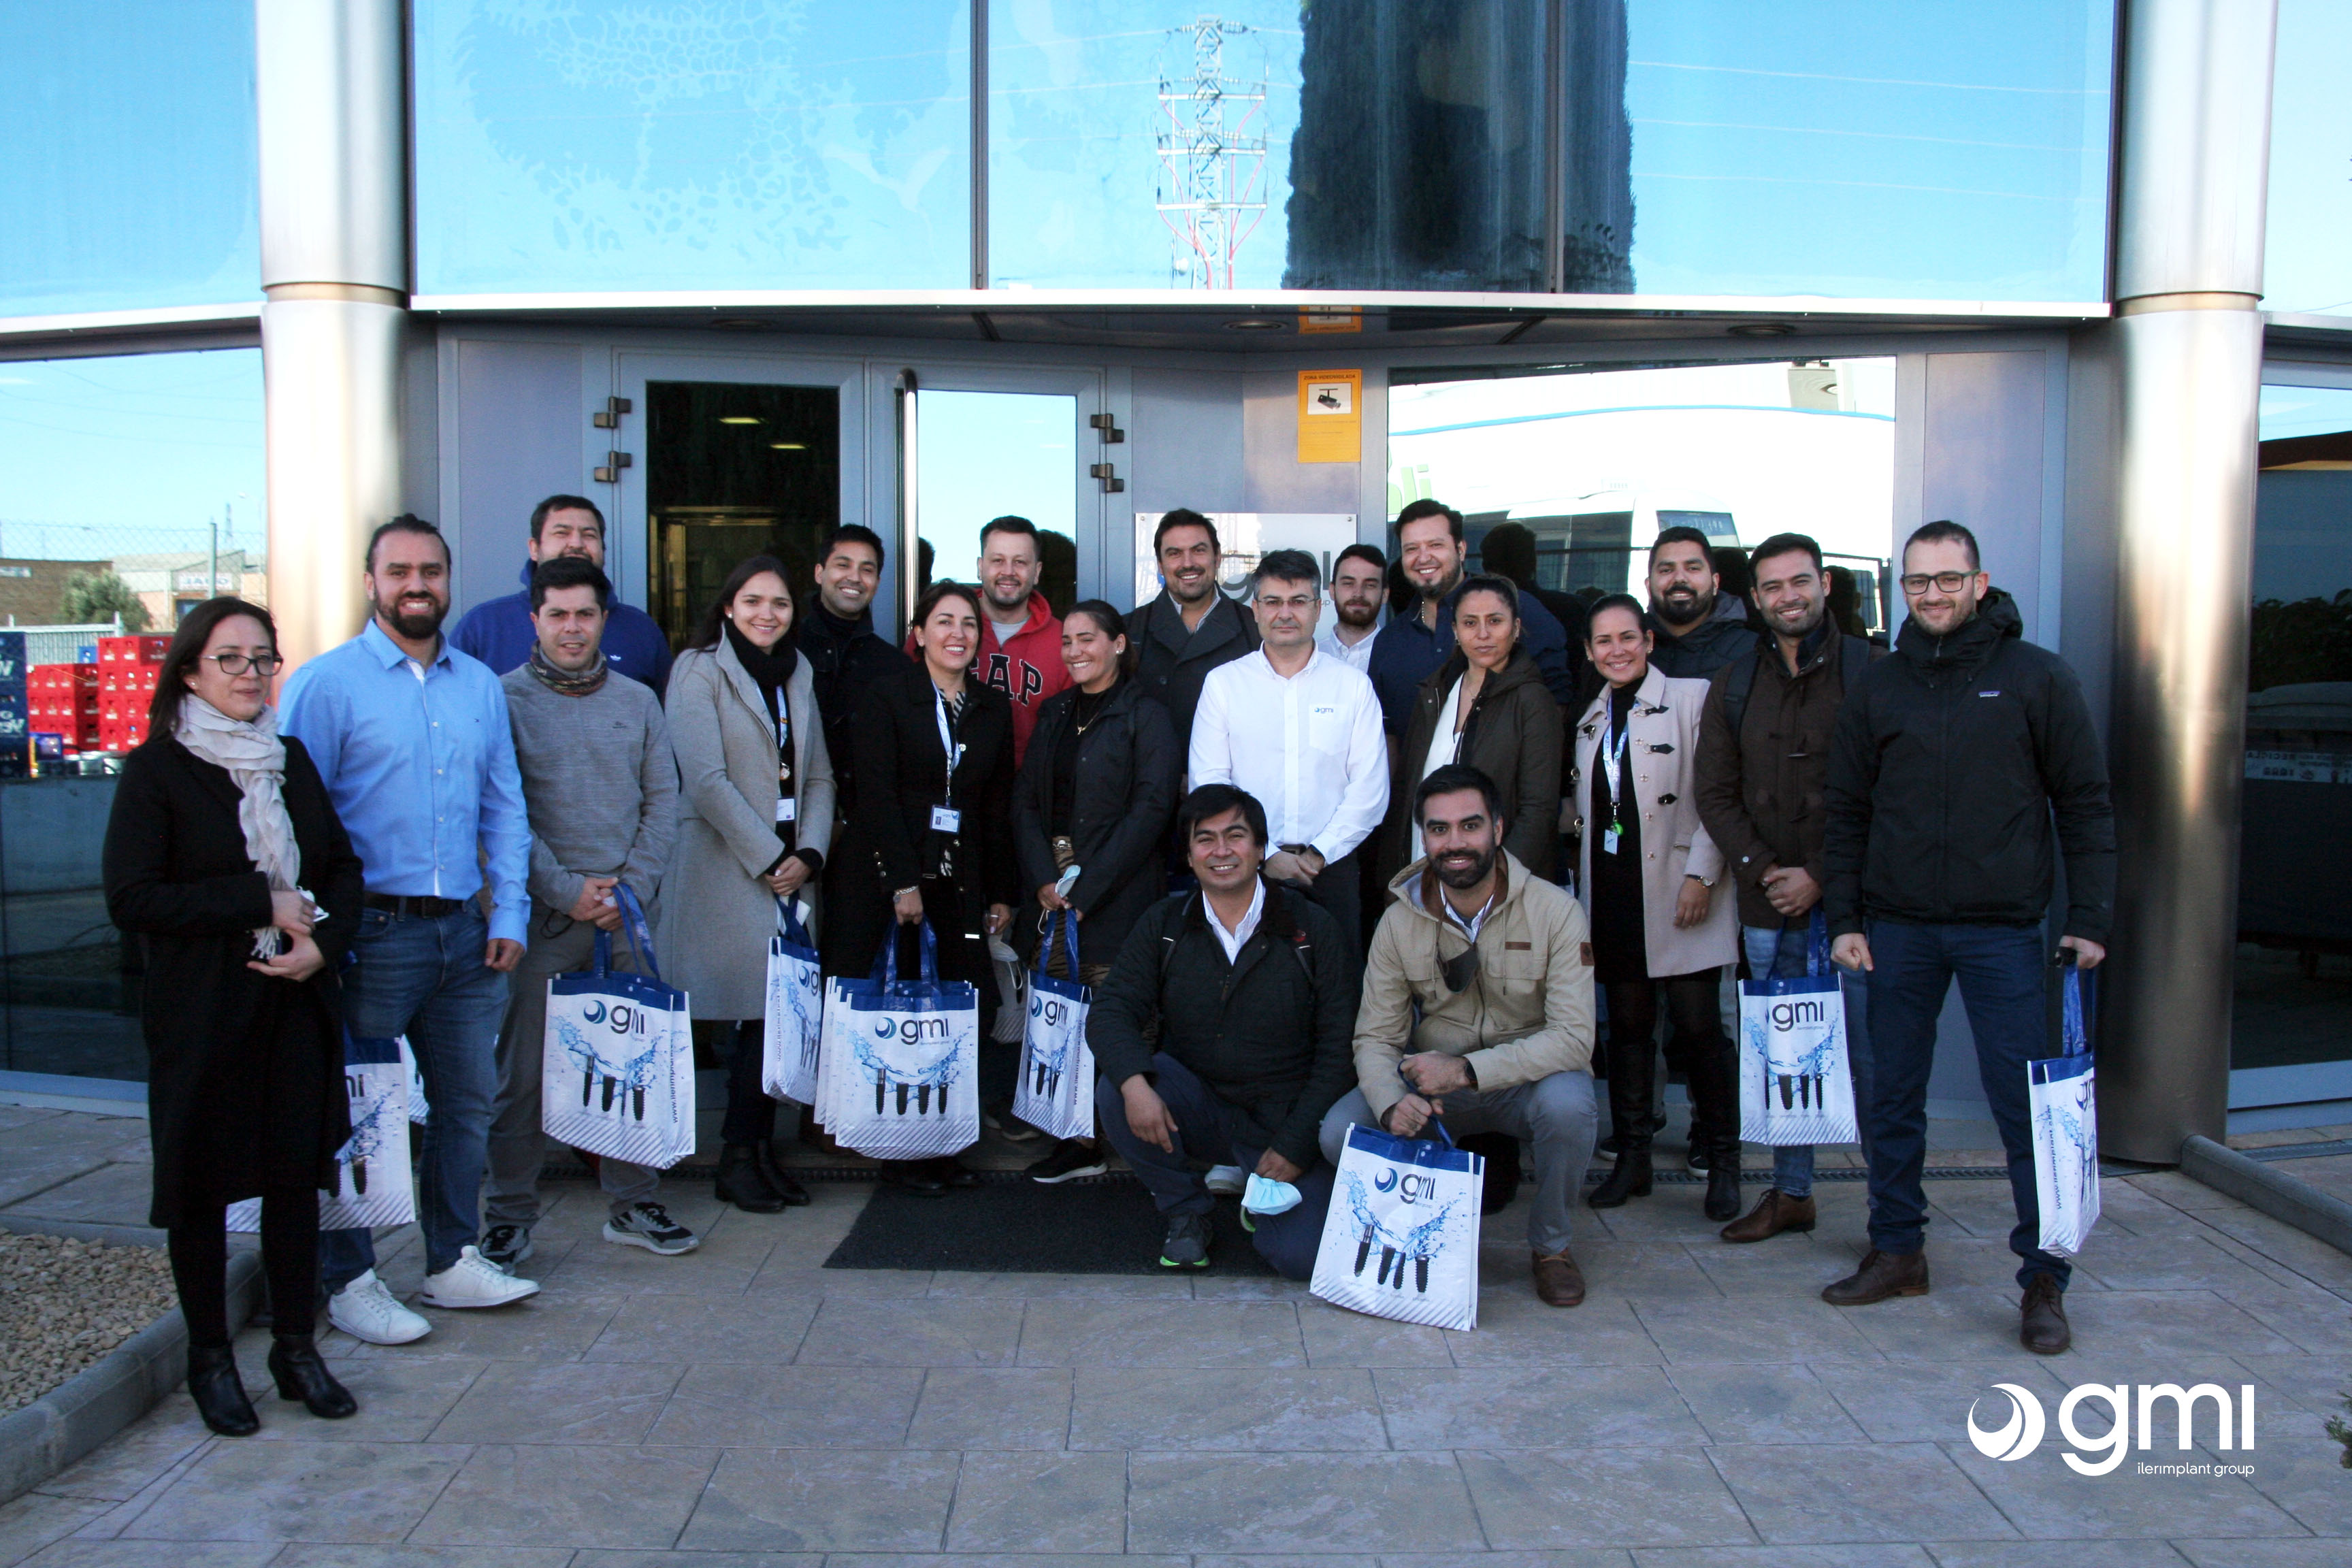 Visit of GMI Chile with a group of doctors